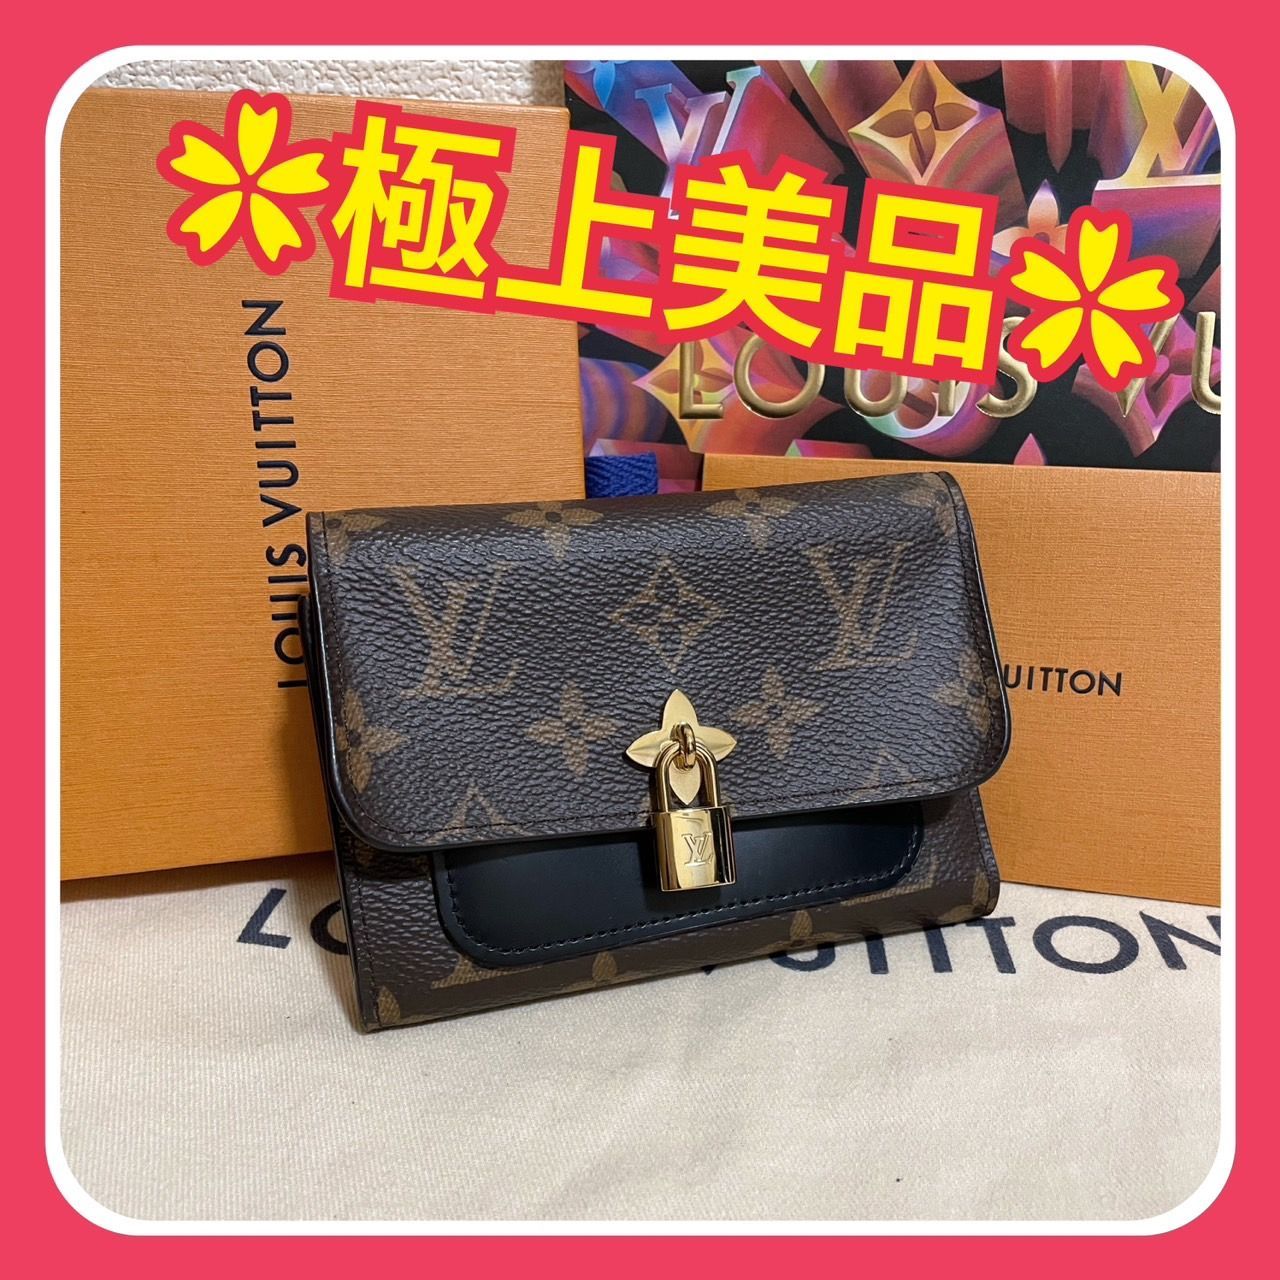 LOUIS VUITTON ルイヴィトン ポルトフォイユ フラワー コンパクト